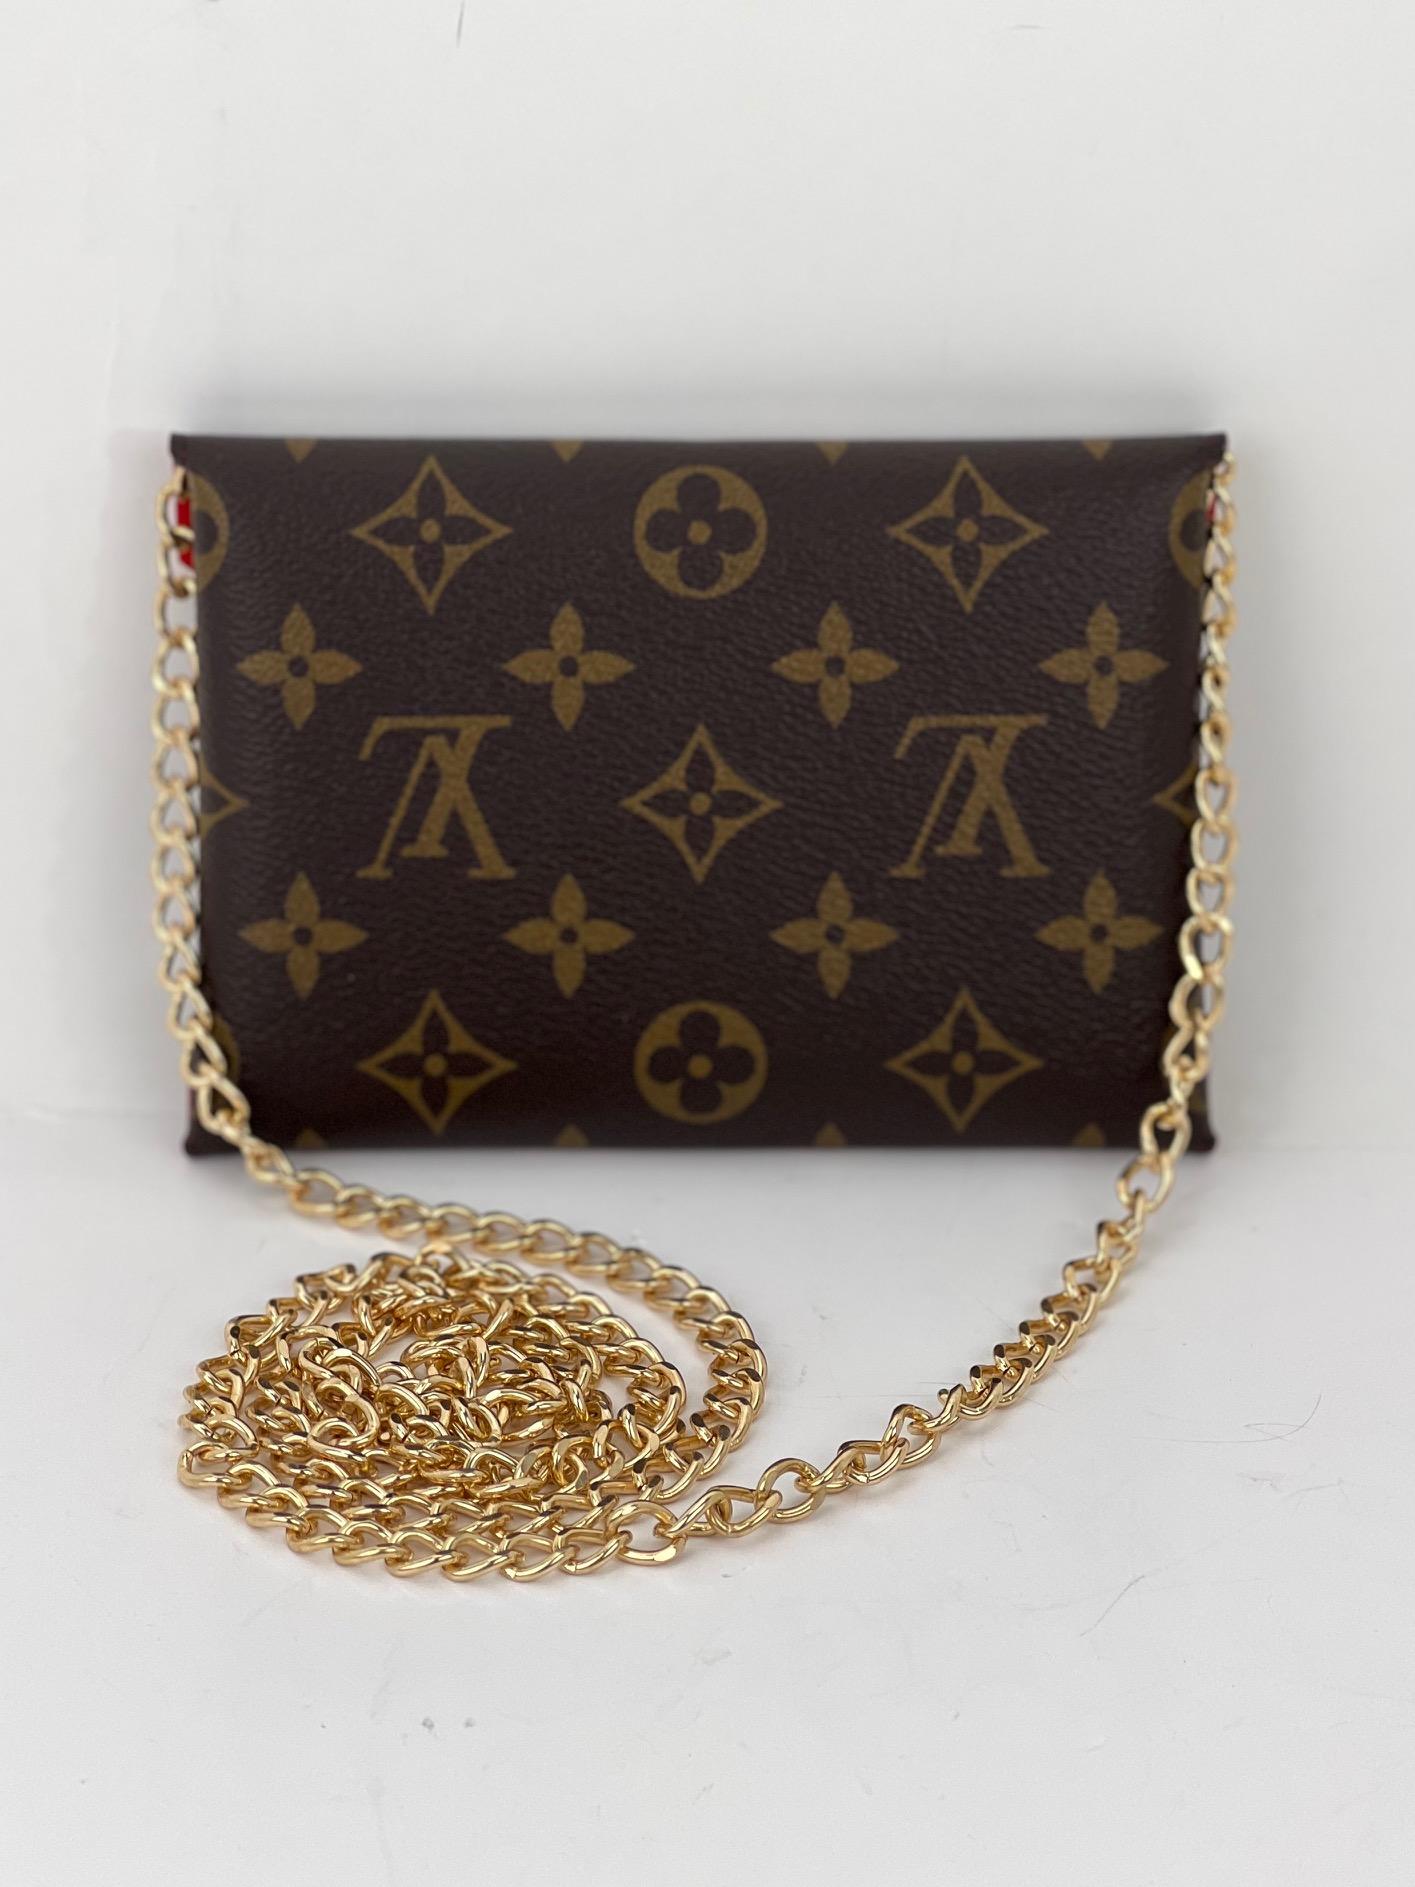 Preowned BUT like New 100% Authentic
LOUIS VUITTON Kirigami Pochette Red Medium
W/Added Non LV Insert & Chain to make a Crossbody
RATING: A+...Excellent, near mint
MATERIAL: Monogram canvas
STRAP: Non LV Golden Strap 47'' long
HANDLE: none
DROP: